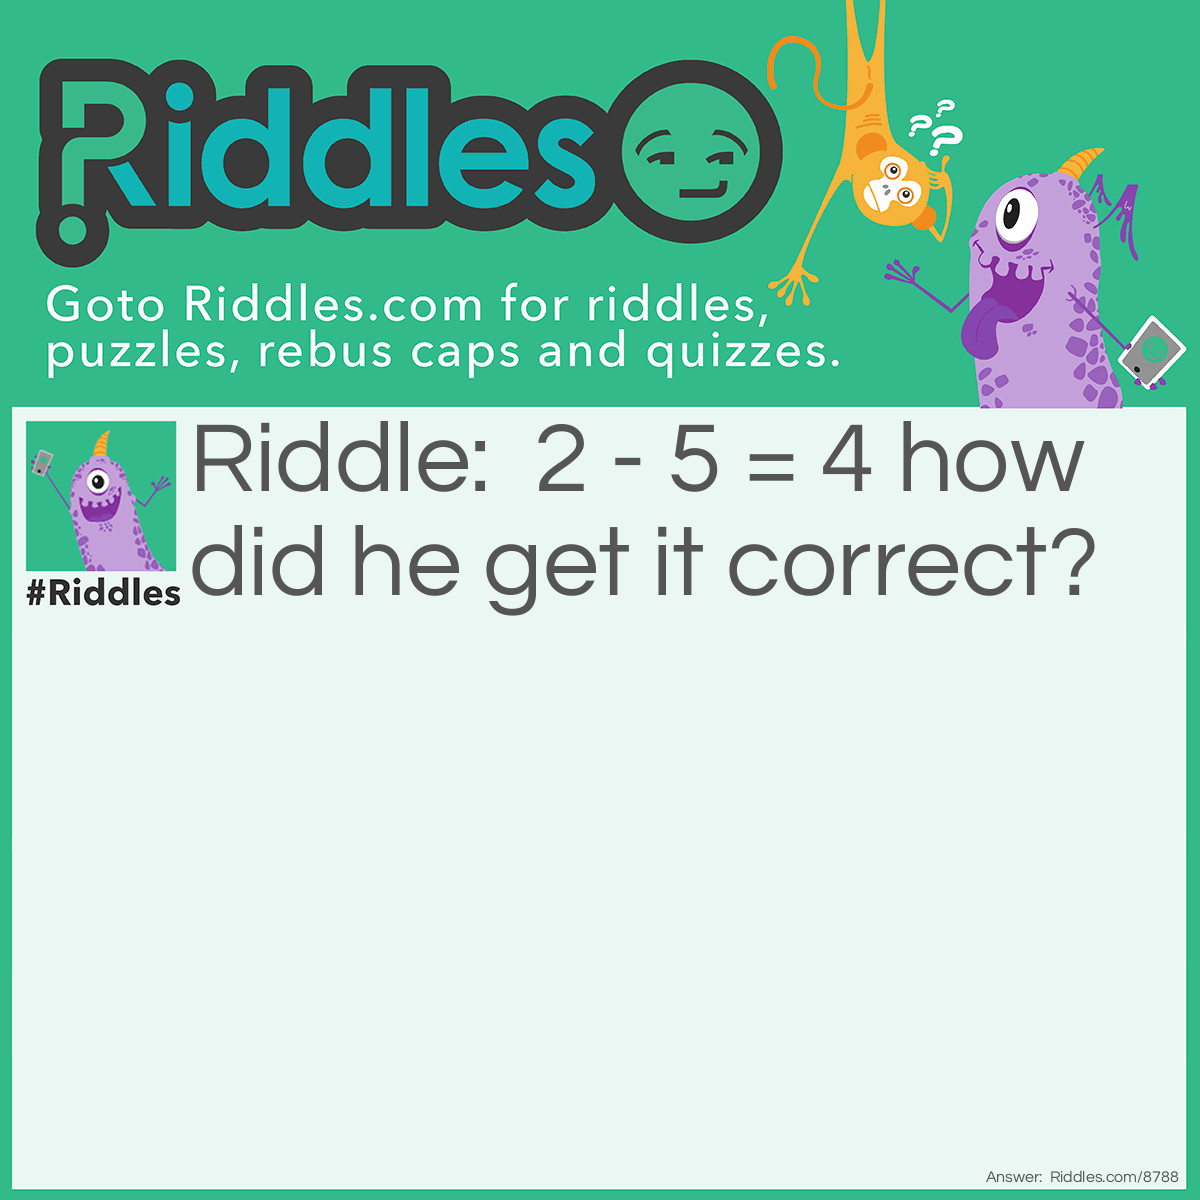 Riddle: 2 - 5 = 4 how did he get it correct? Answer: F(iv)E number 4, IV means 4